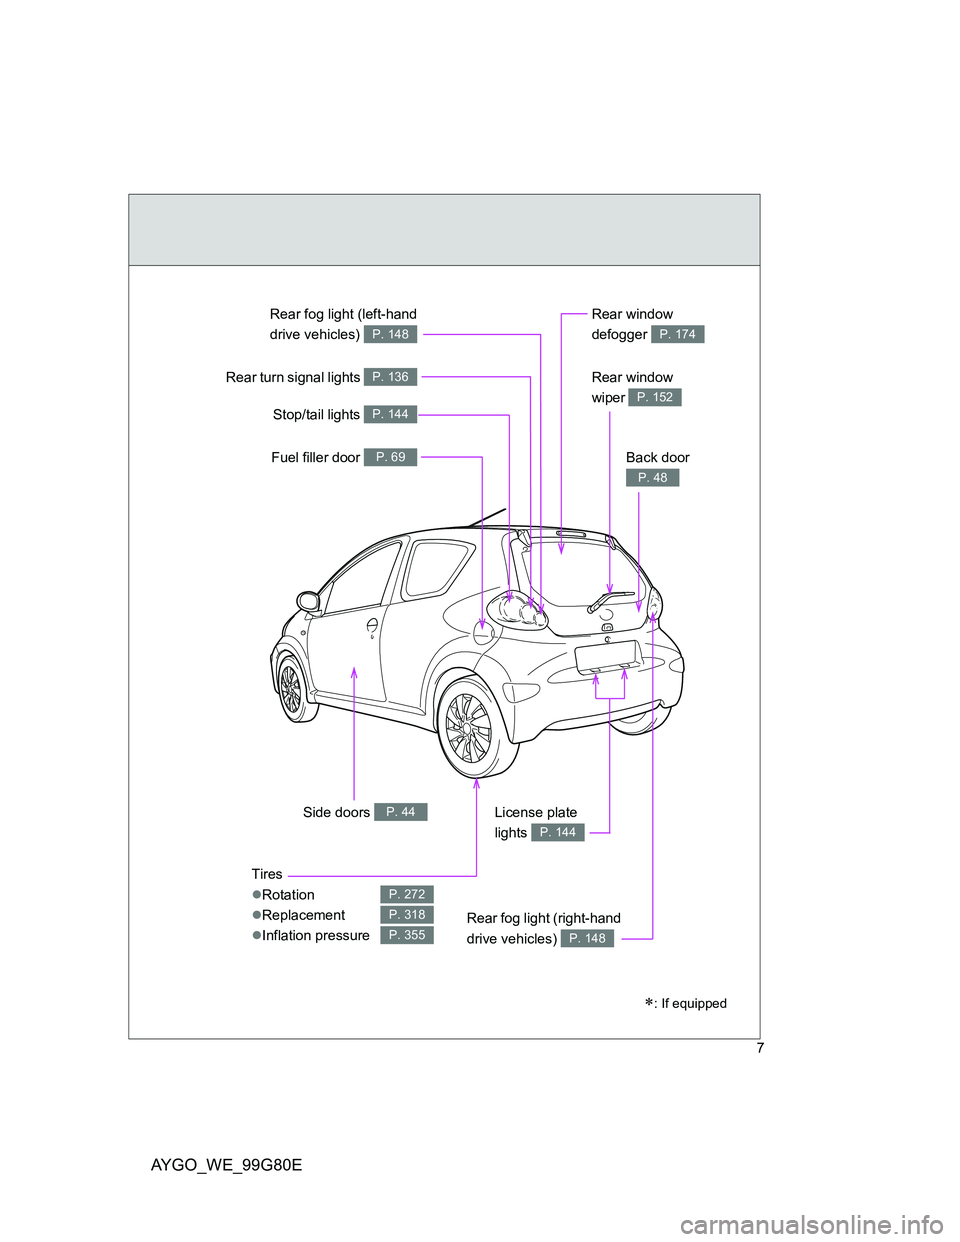 TOYOTA AYGO 2014  Owners Manual (in English) AYGO_WE_99G80E
7
Rear window 
wiper 
P. 152
Tires
Rotation
Replacement
Inflation pressure
P. 272
P. 318
P. 355
Side doors P. 44
Rear window 
defogger 
P. 174
Fuel filler door P. 69
Stop/tail 